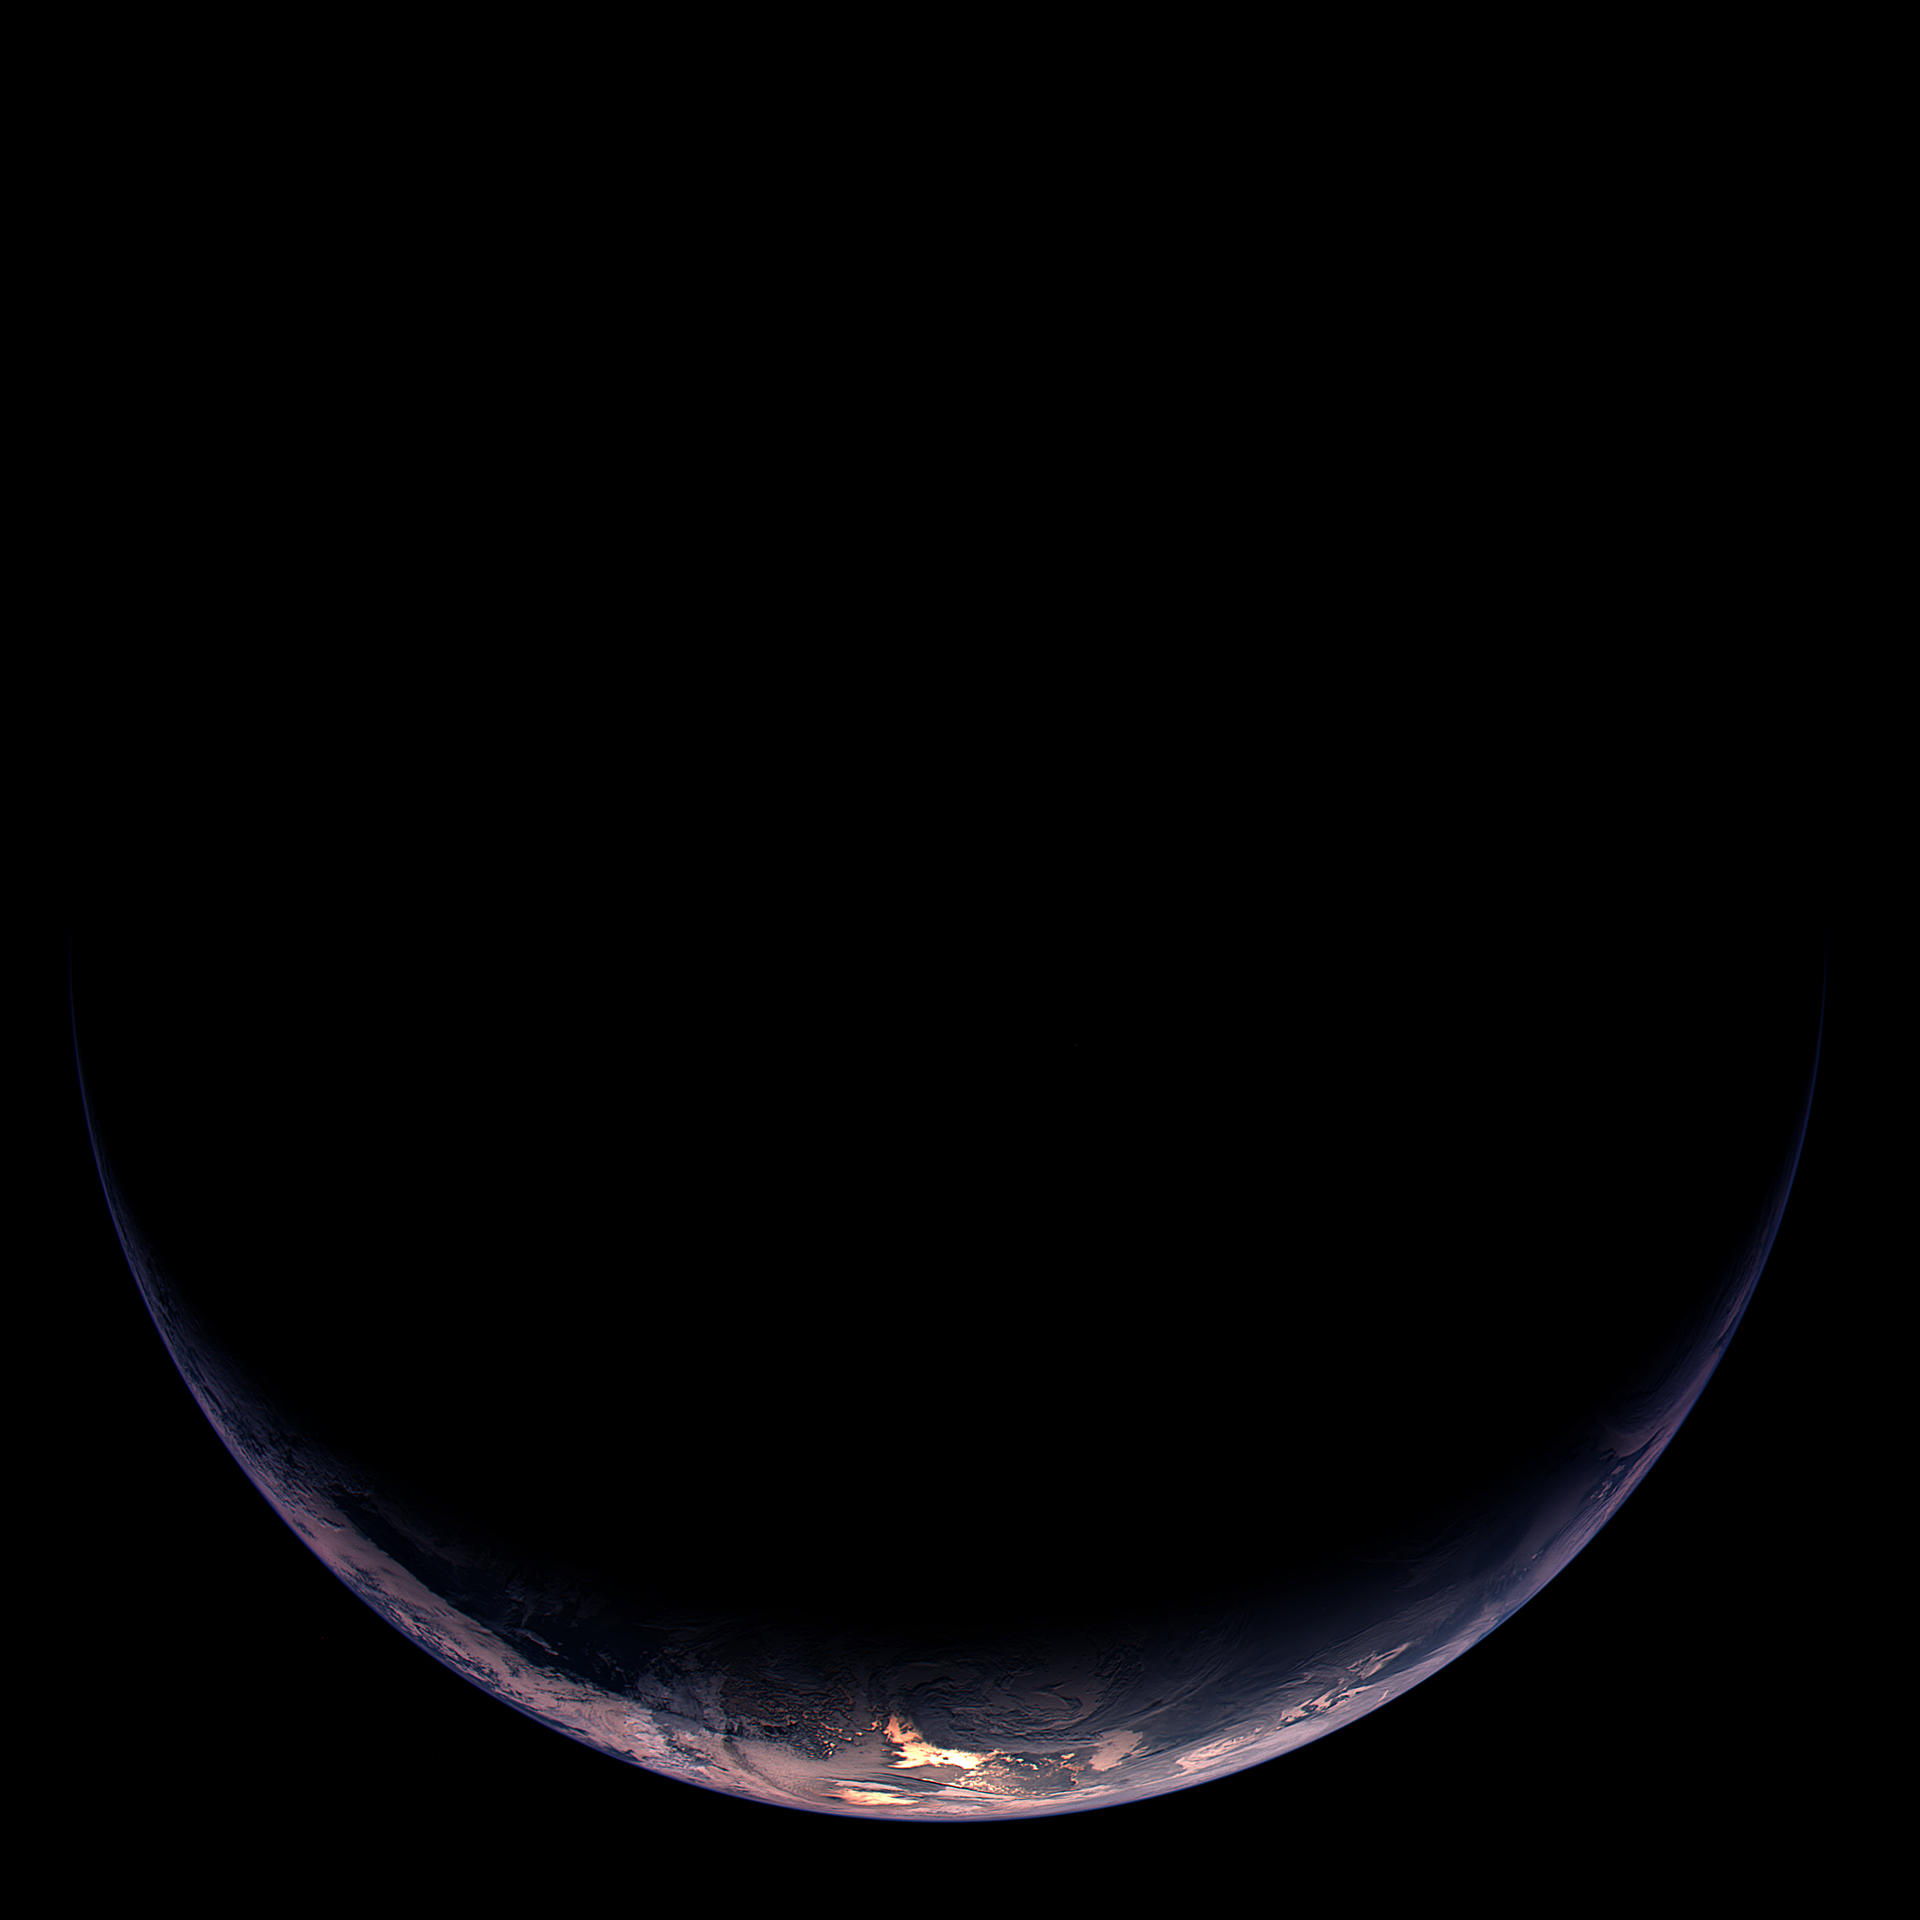 Illuminated crescent of Earth showing part of South America and Antarctica